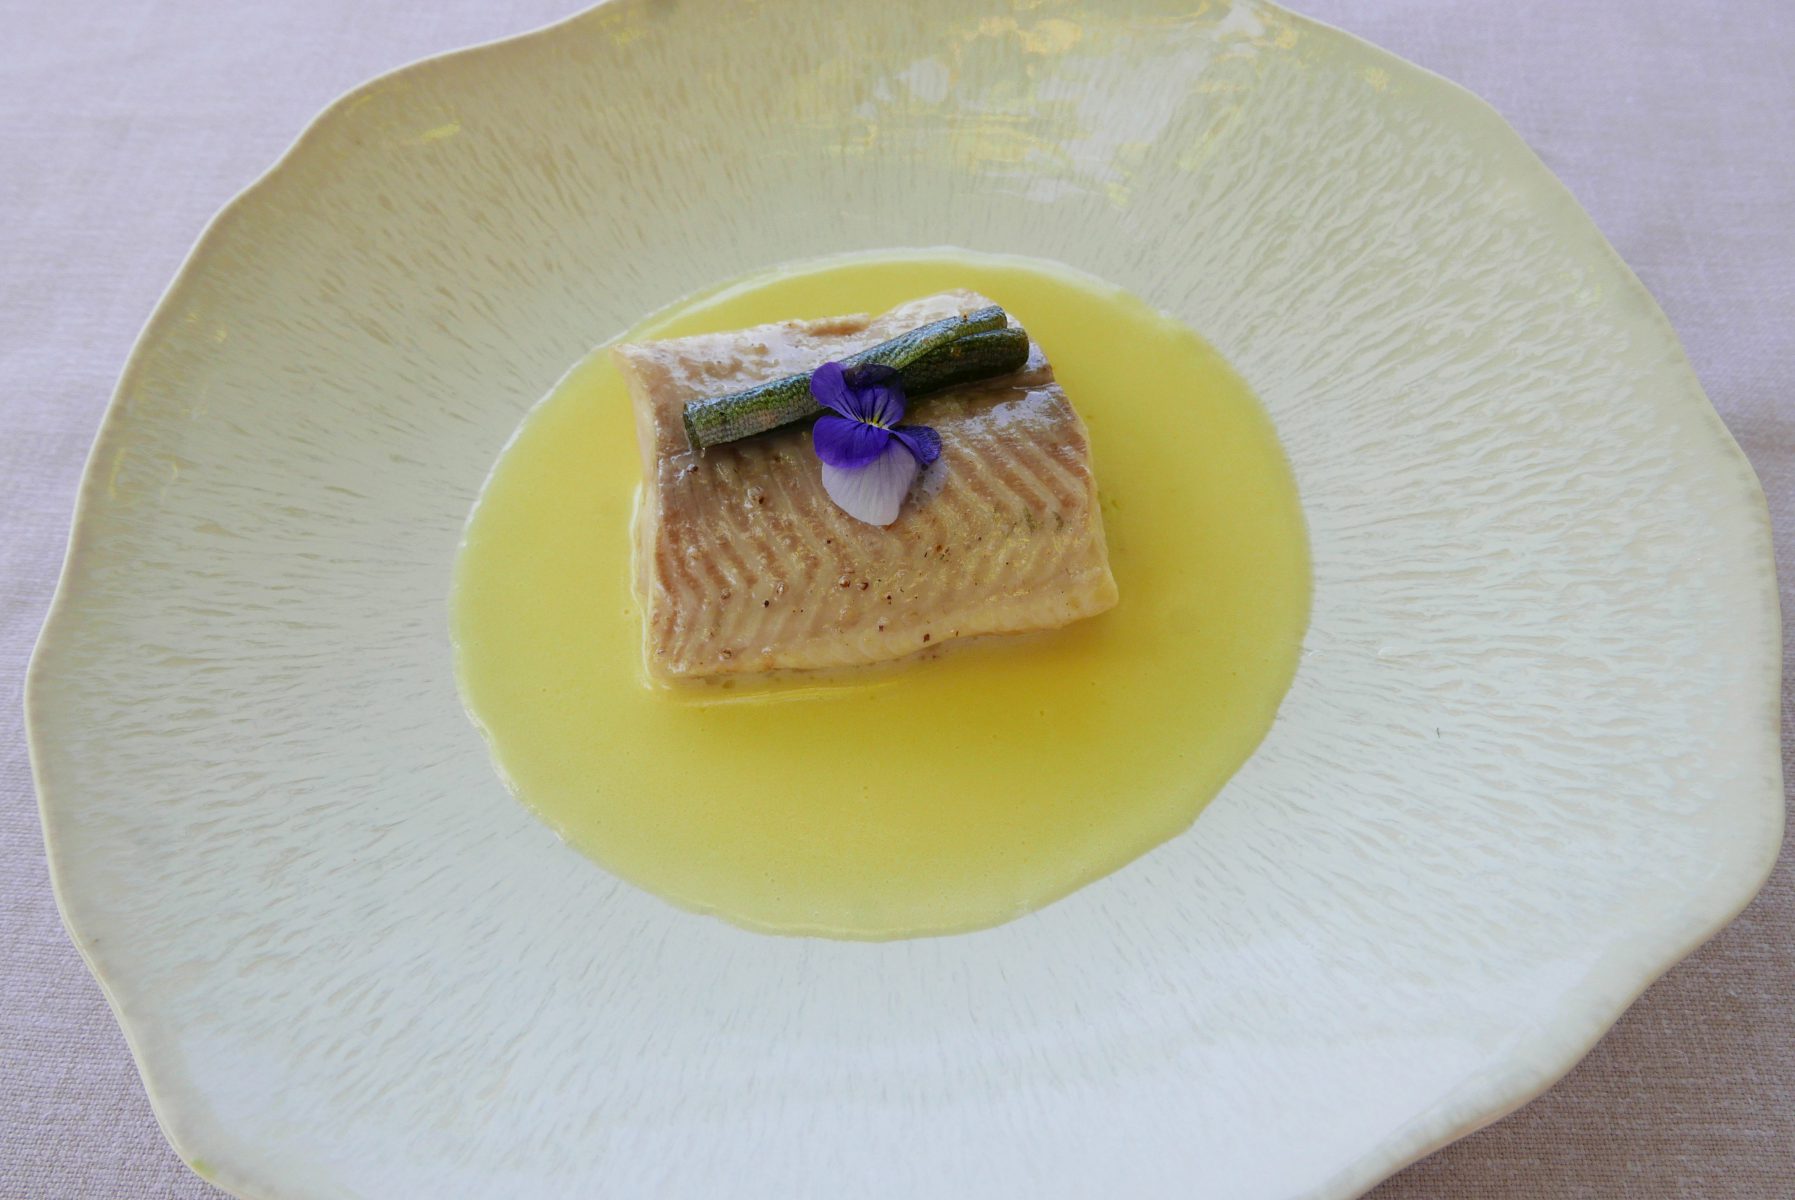 Char from Annecy lake with violet sauce at L'Auberge du Père Bise, Talloires-Montmin.